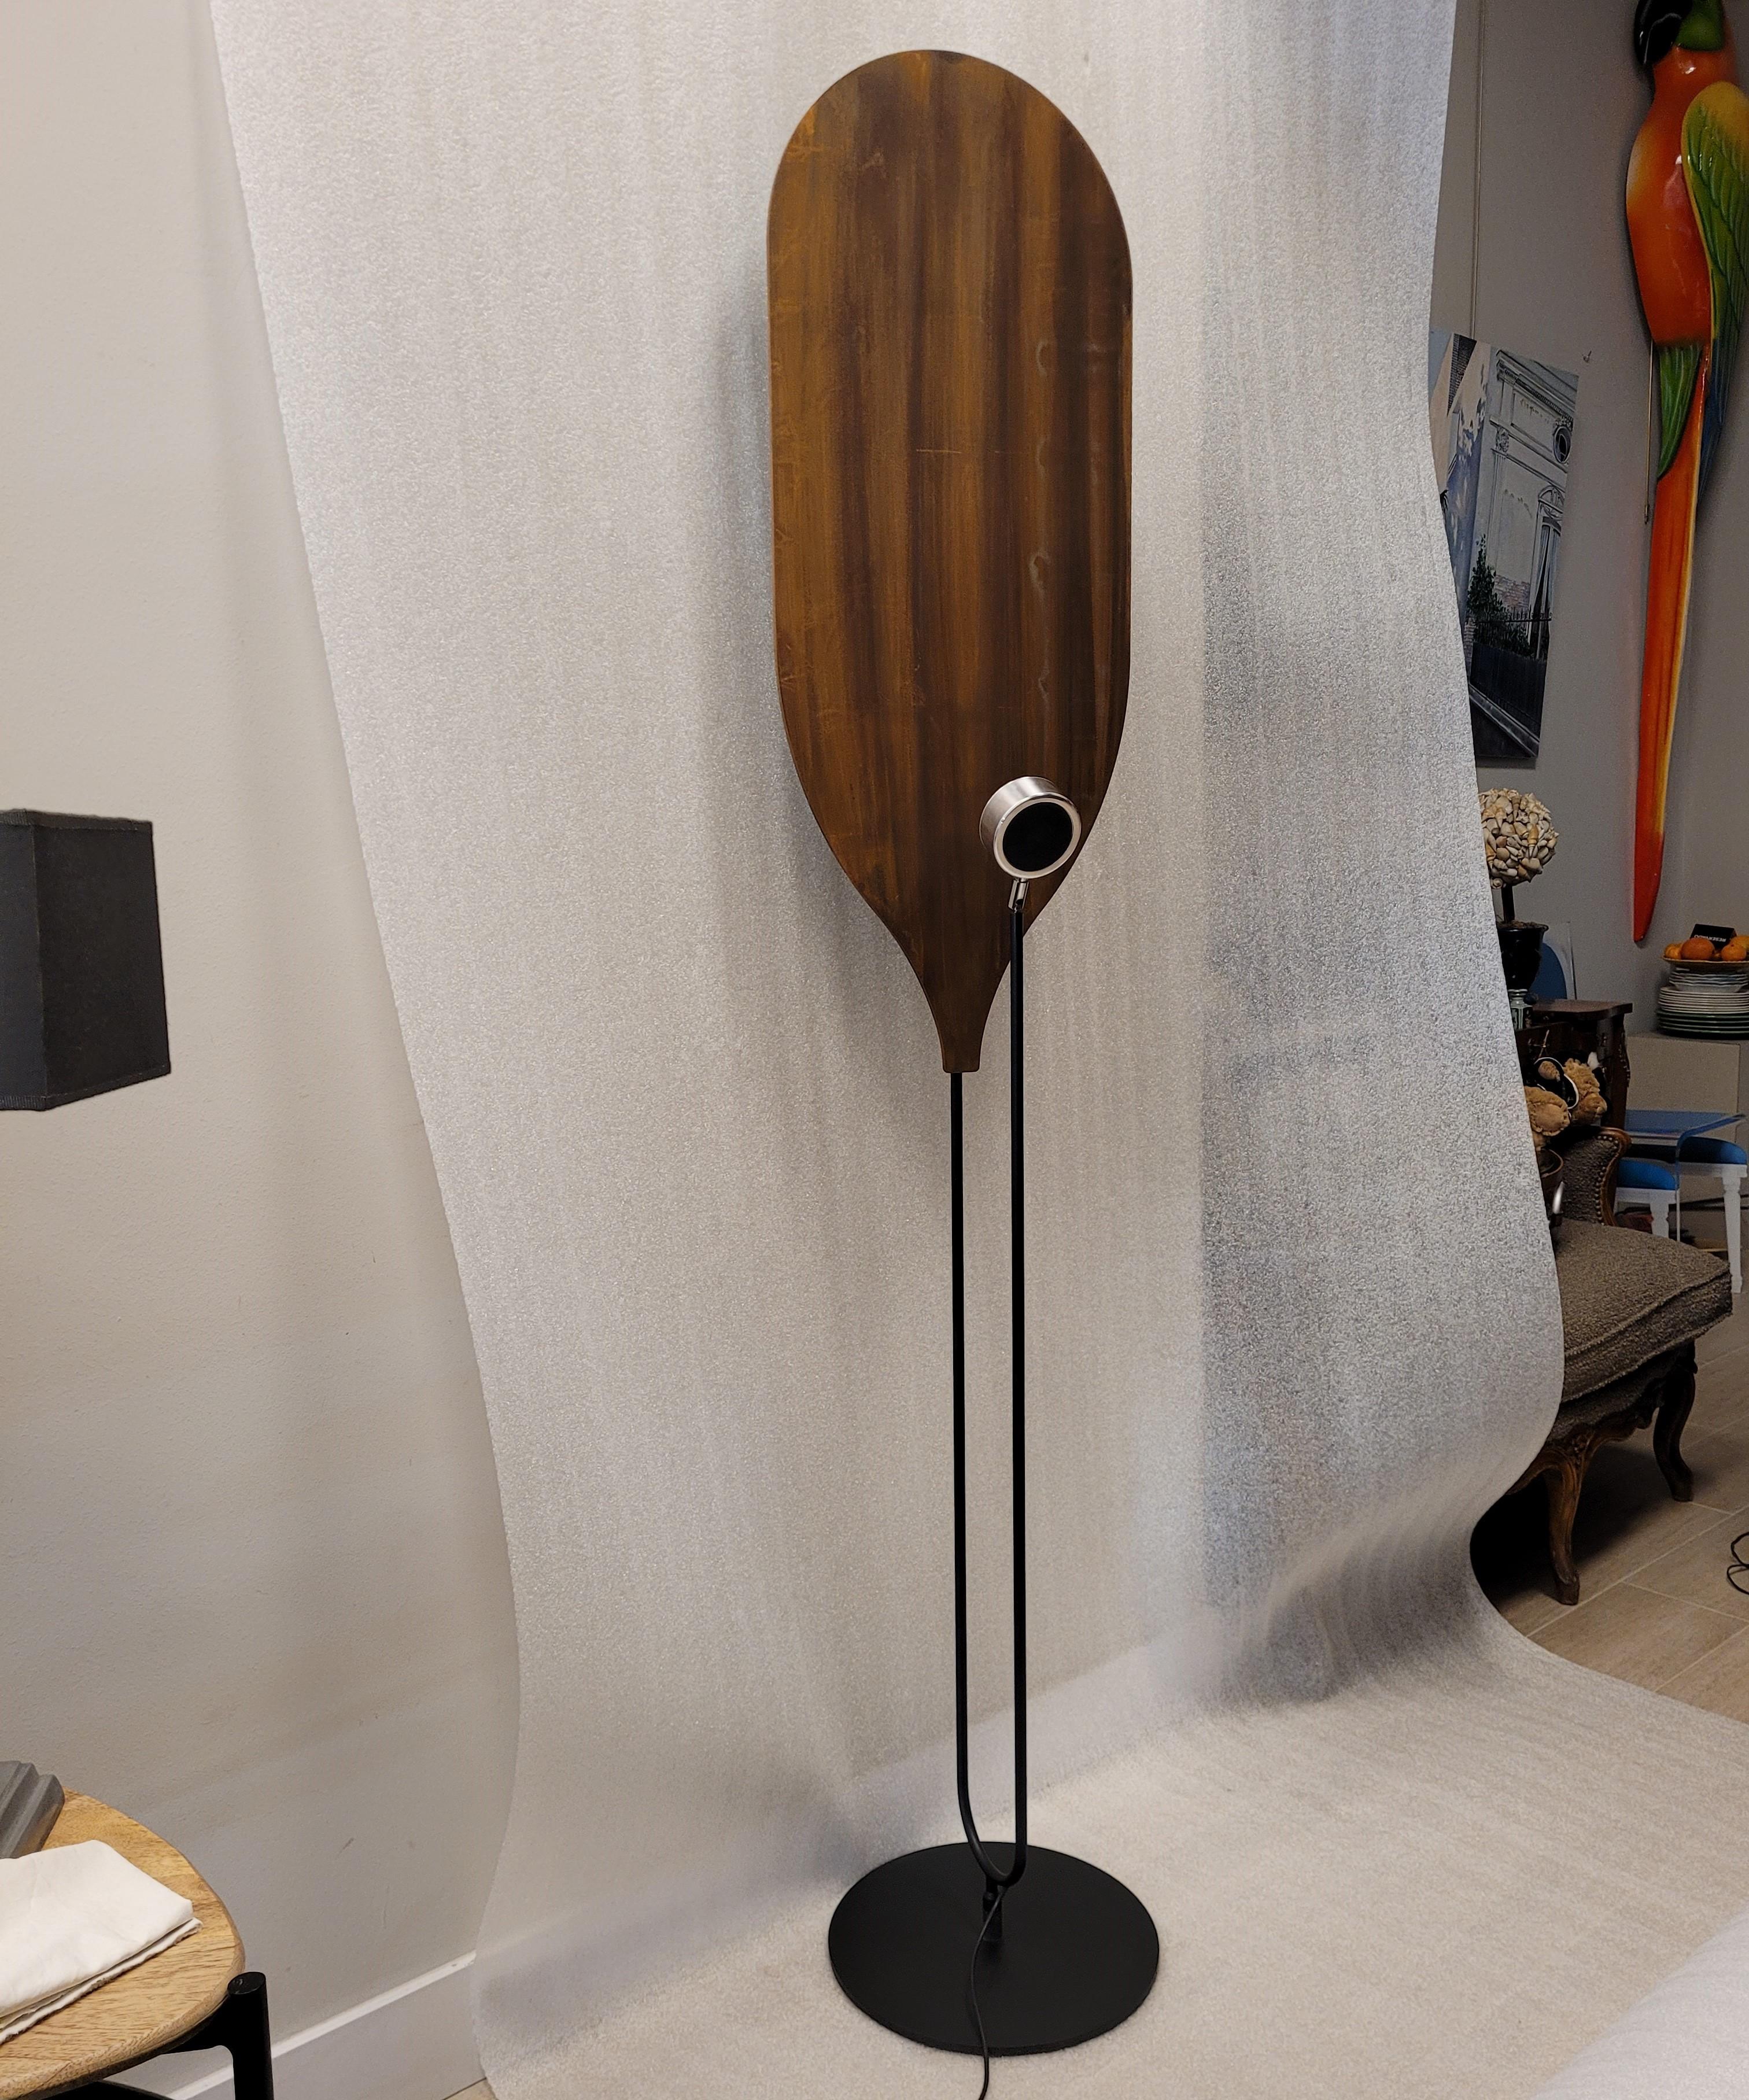 Amazing Robin model floor lamp, designed by Carlo Zerbaro for Roche Bobois. Zerbaro was born into a family of engineers, where he soon developed a talent for industrial design. His designs for the French brand, especially lamps, are characterized by